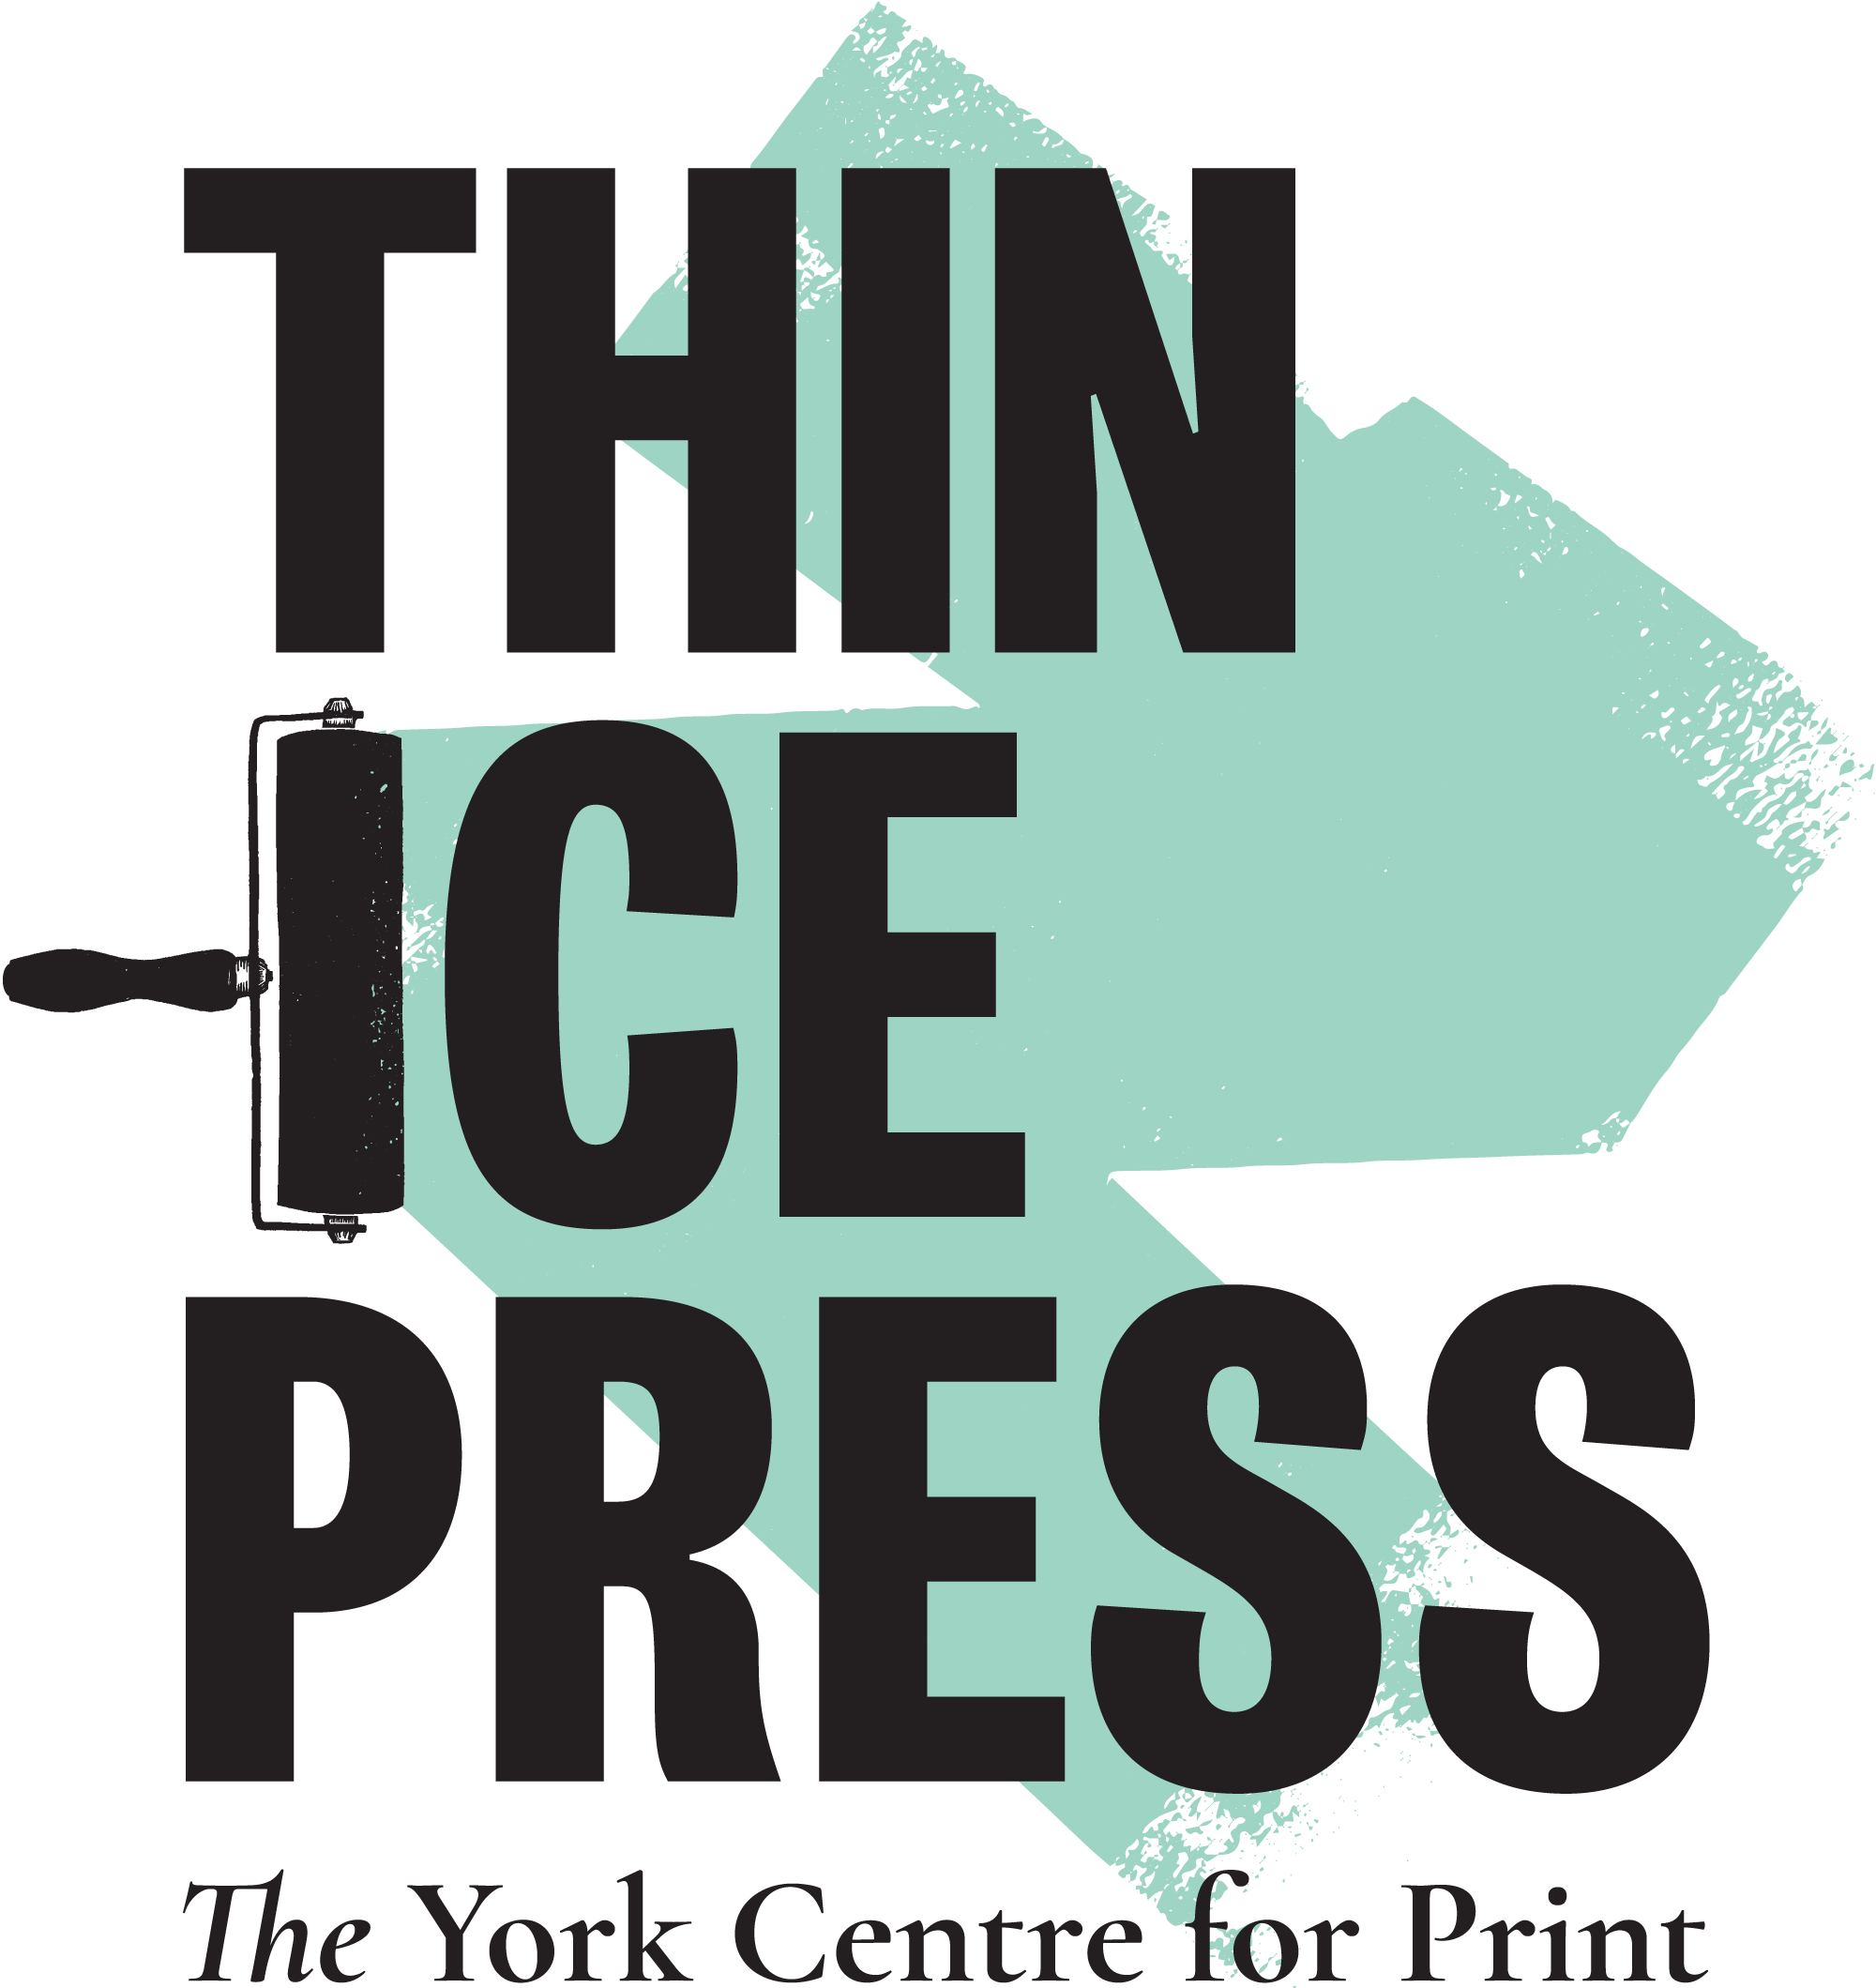 Thin Ice Press: The York Centre for Print